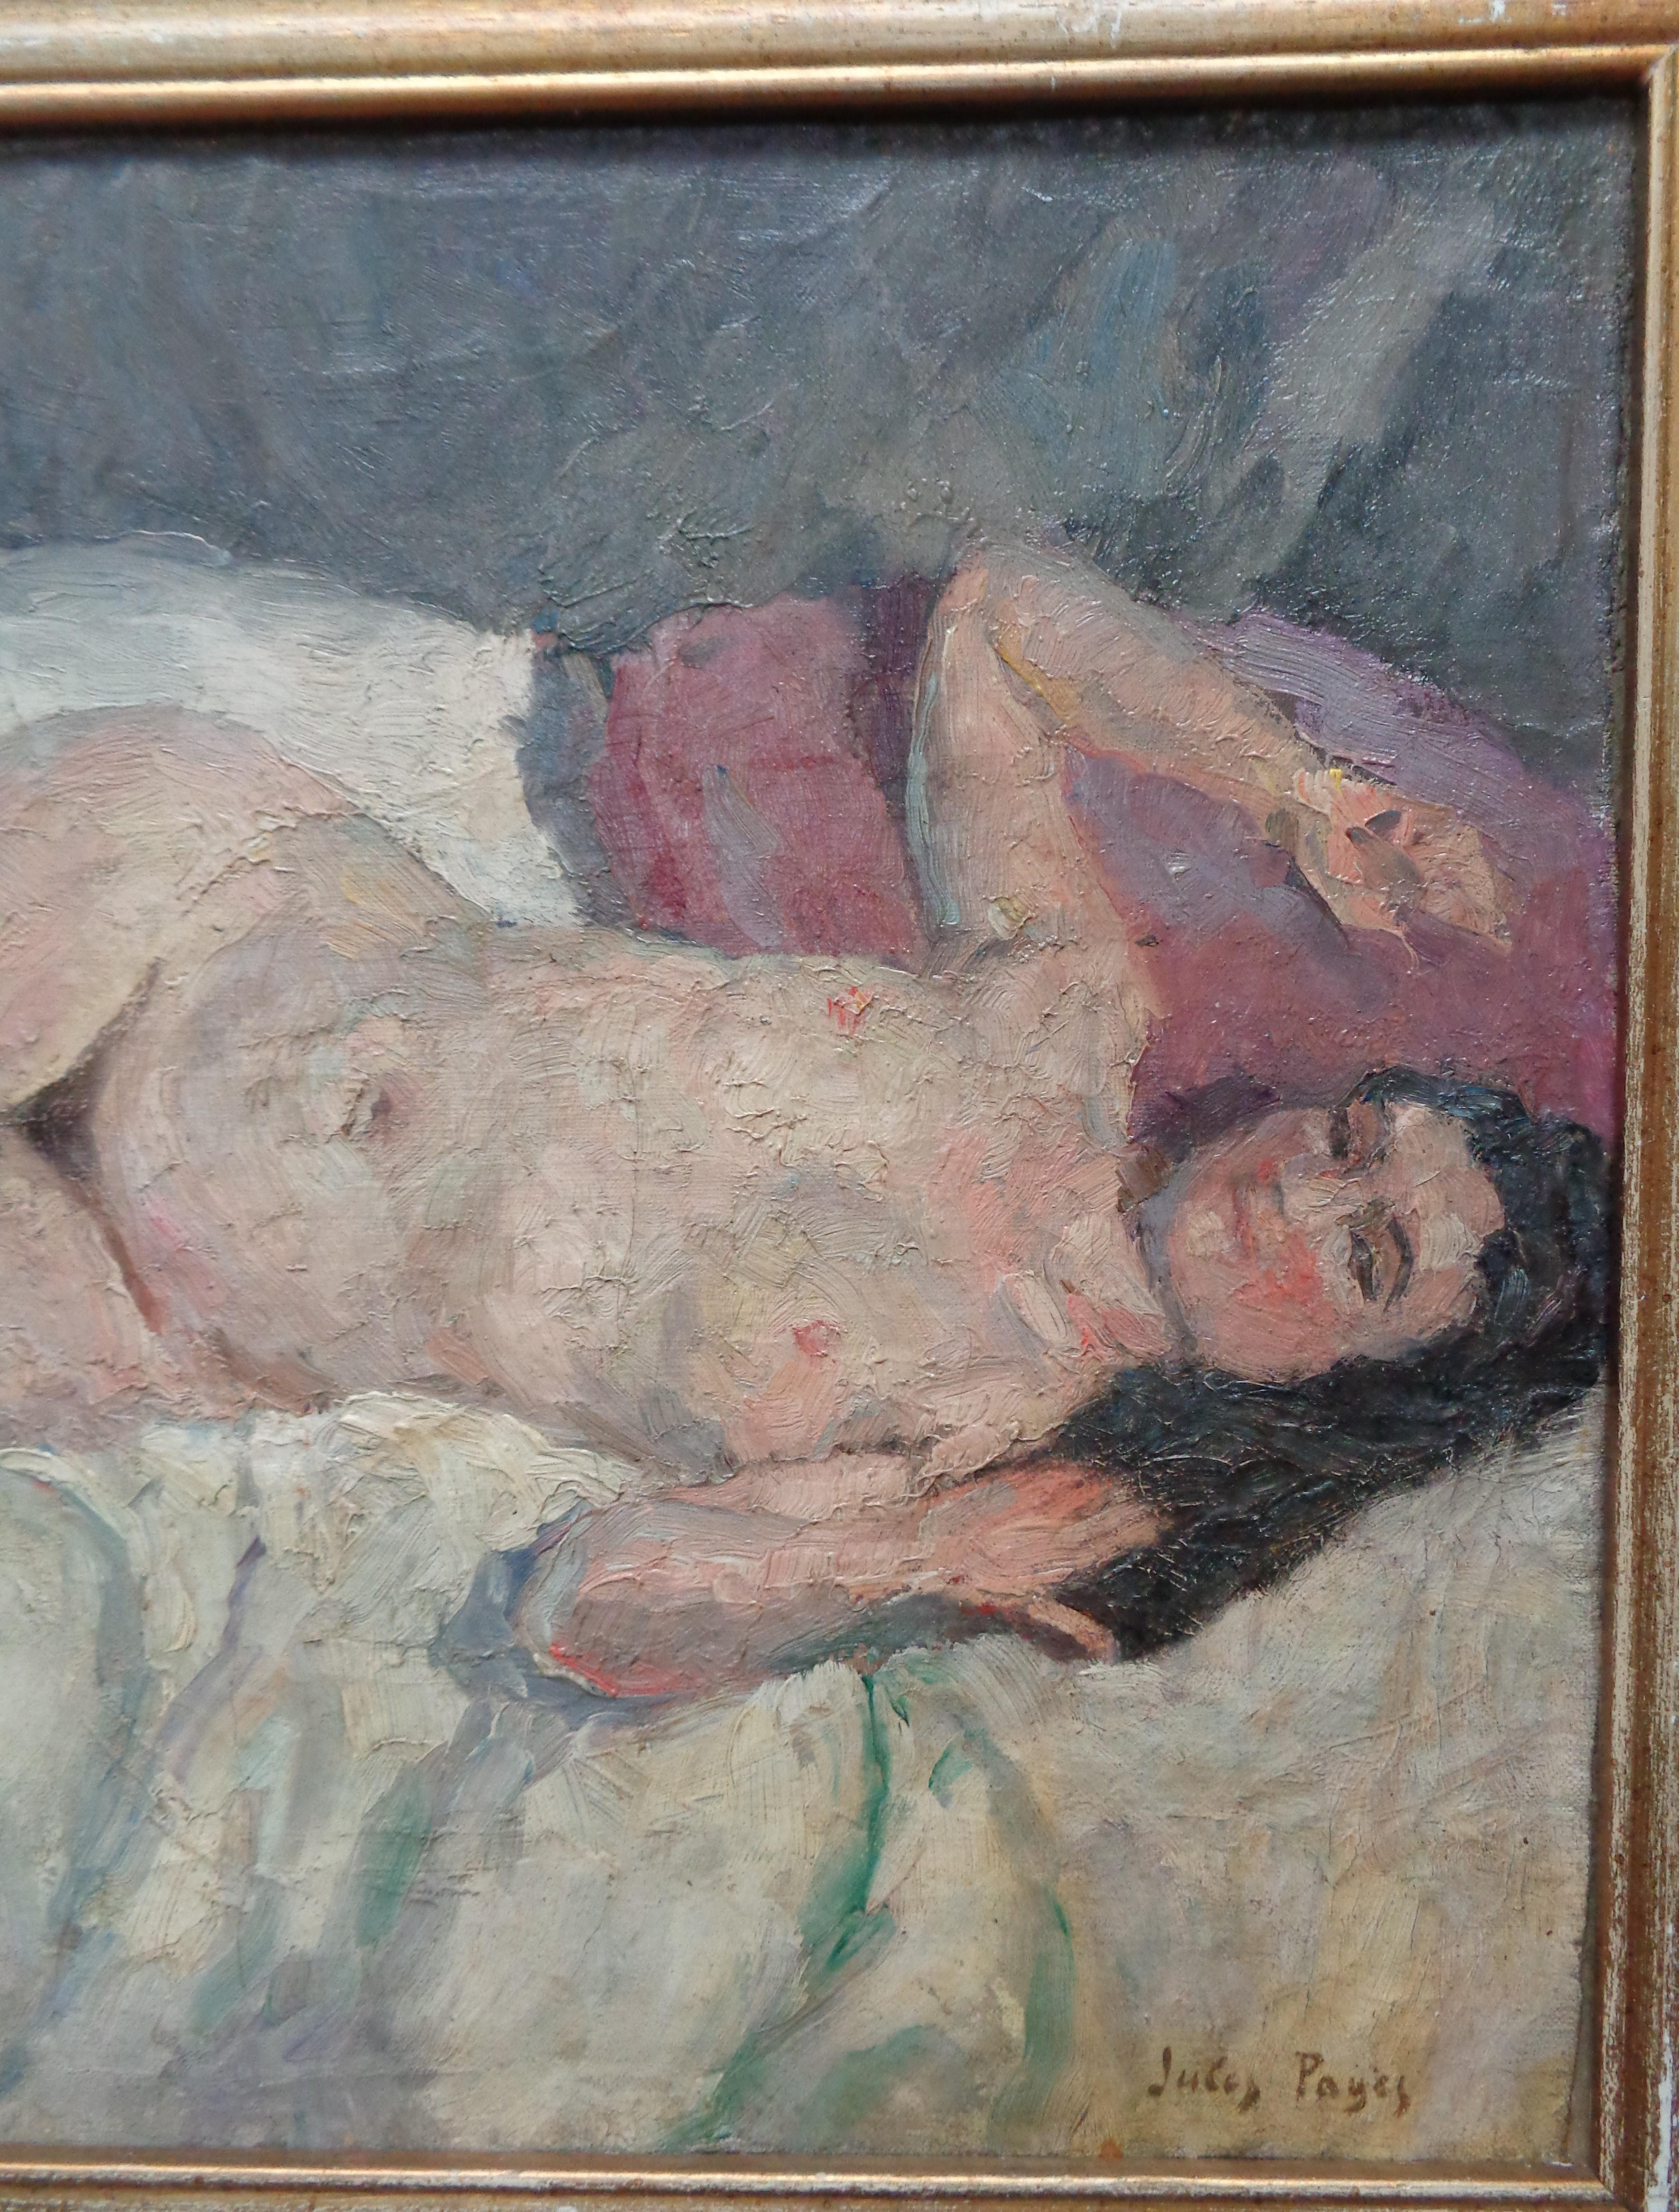 Figurative Nude Painting by Jules Pages 1867 - 1946 American, California, artist For Sale 1